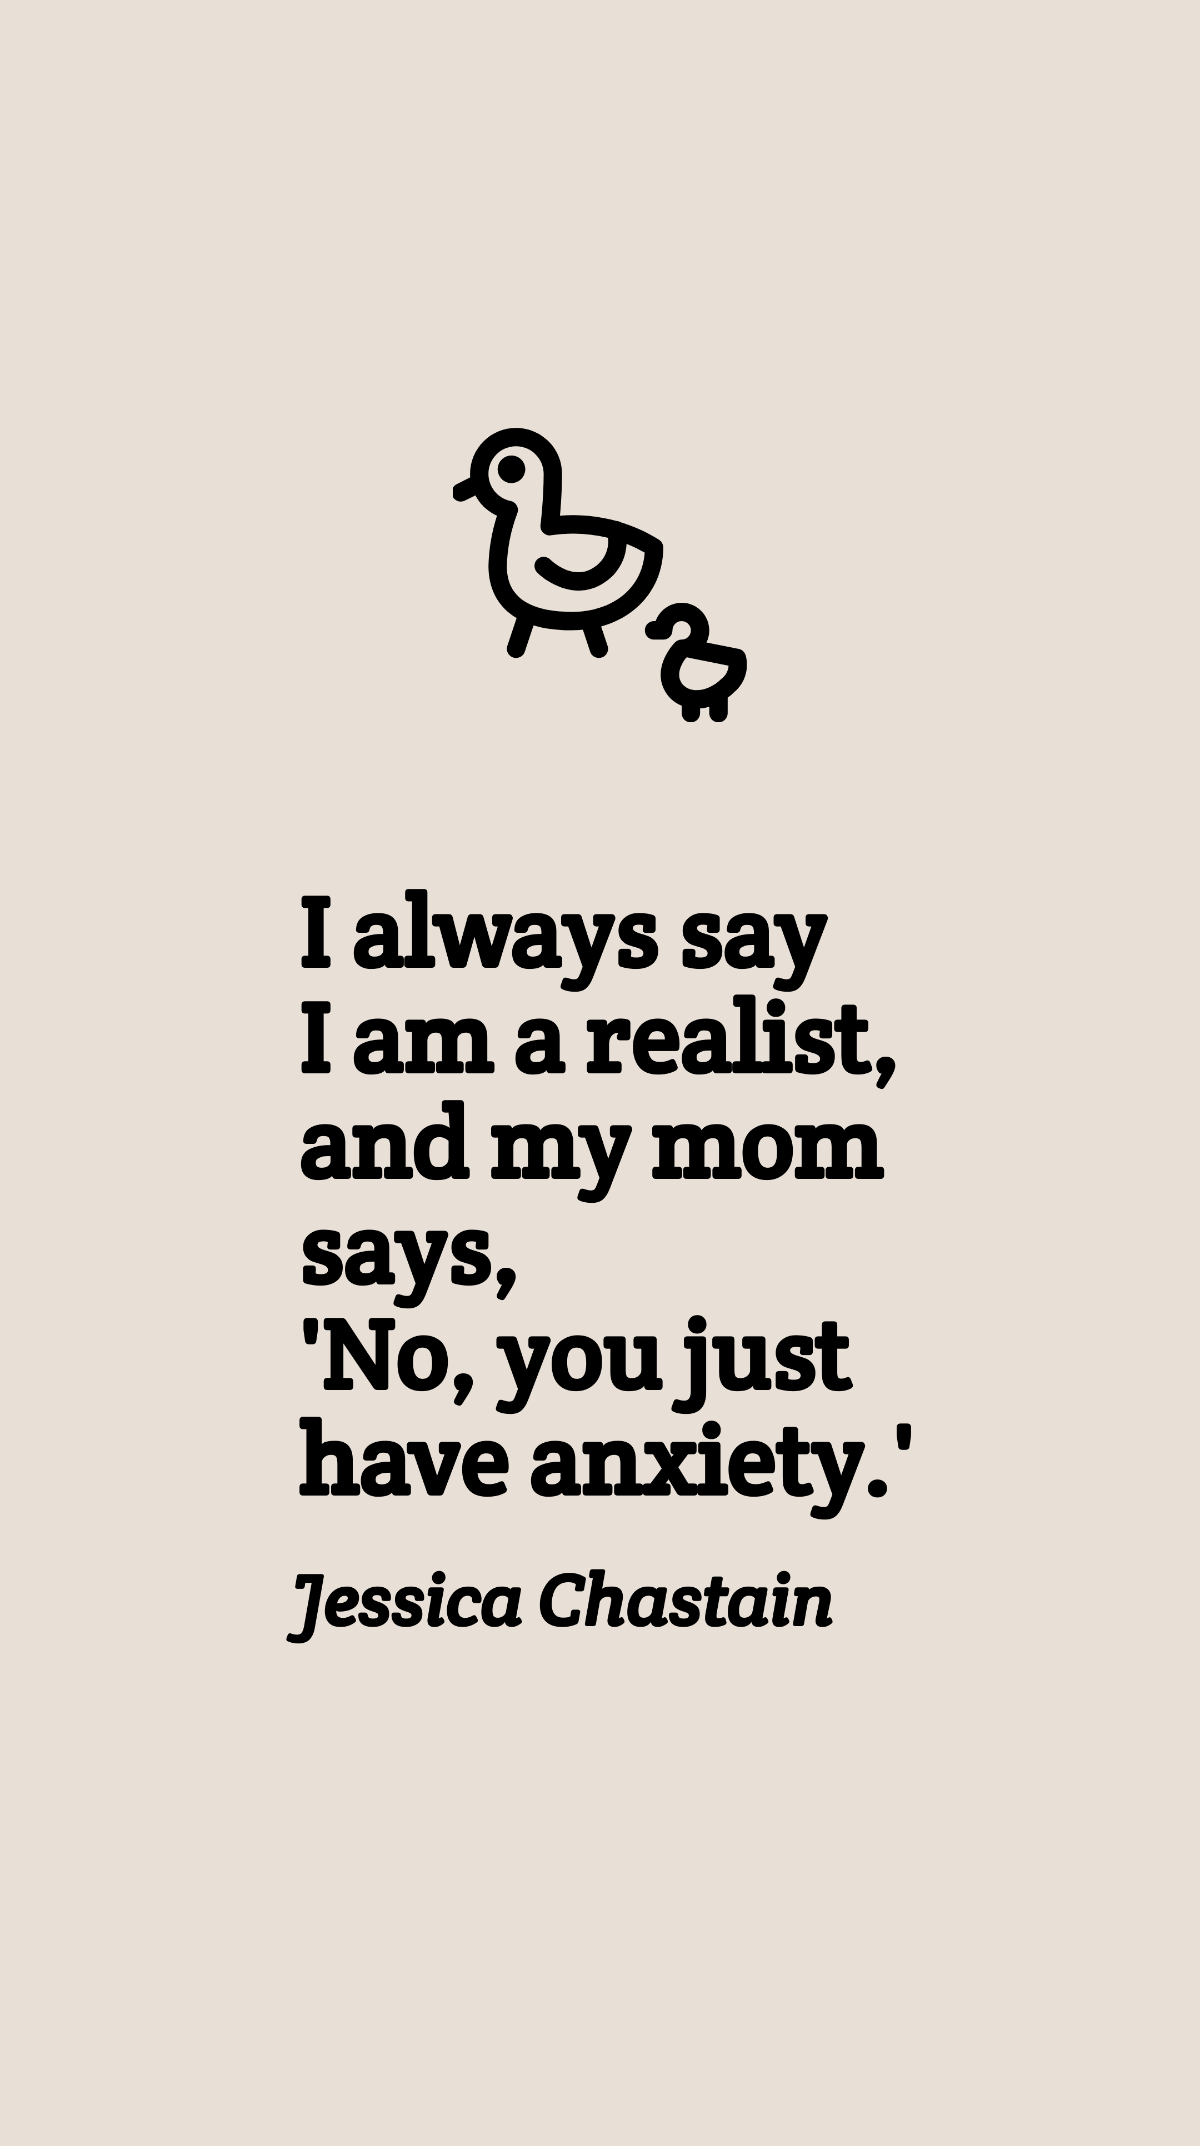 Free Jessica Chastain - I always say I am a realist, and my mom says, 'No, you just have anxiety.' Template